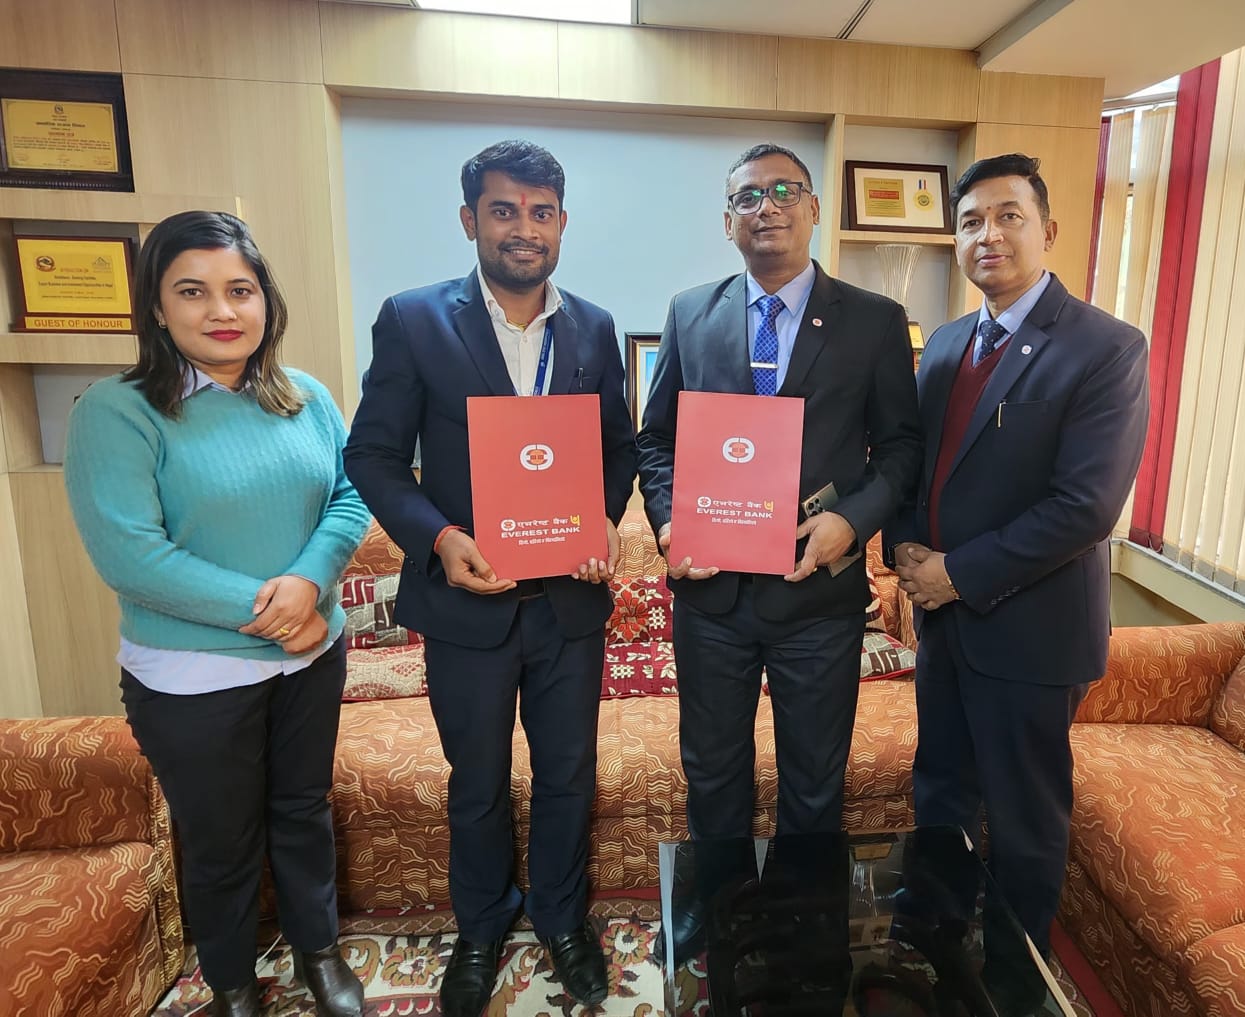 EBL signs MoU with ASG Eye Care & Health Services Pvt Ltd.